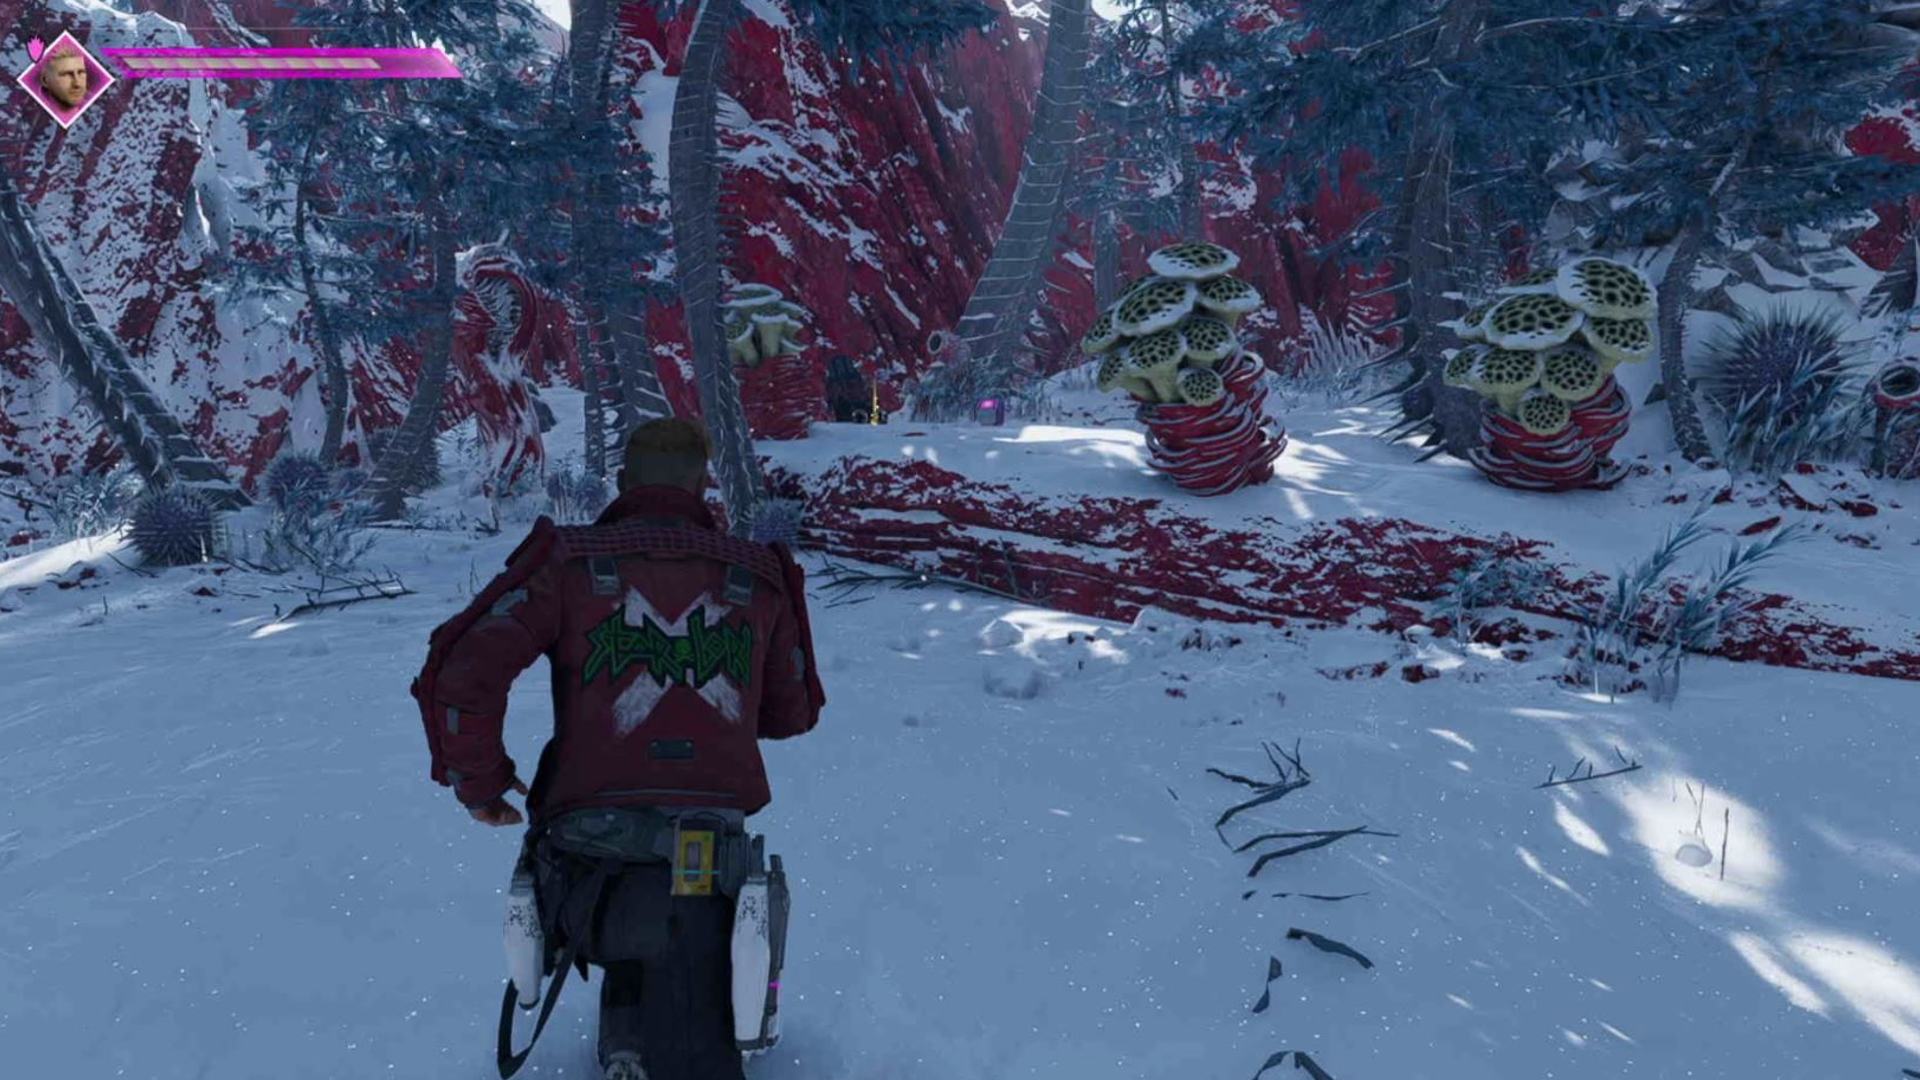 Guardians of the Galaxy outfit locations: Star-Lord is running towards the outfit box surrounded by poison plants.